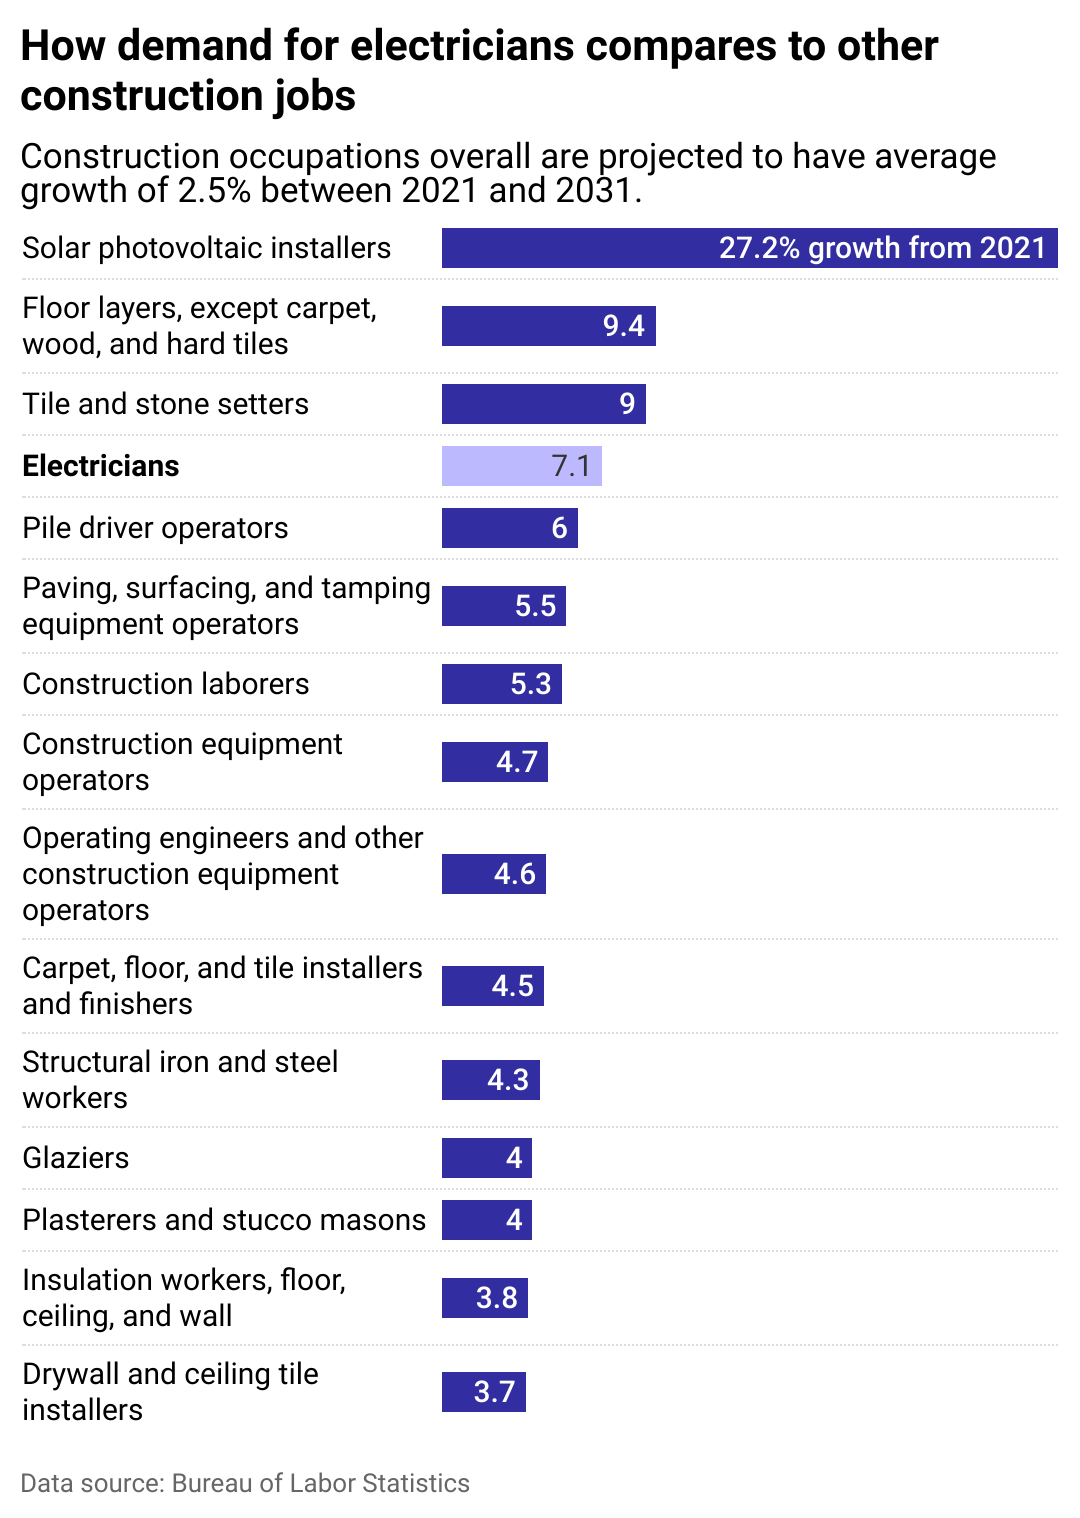 Bar chart showing electrician jobs are projected to grow faster than other construction occupations. Solar photovoltaic installers showed the greatest projected growth.